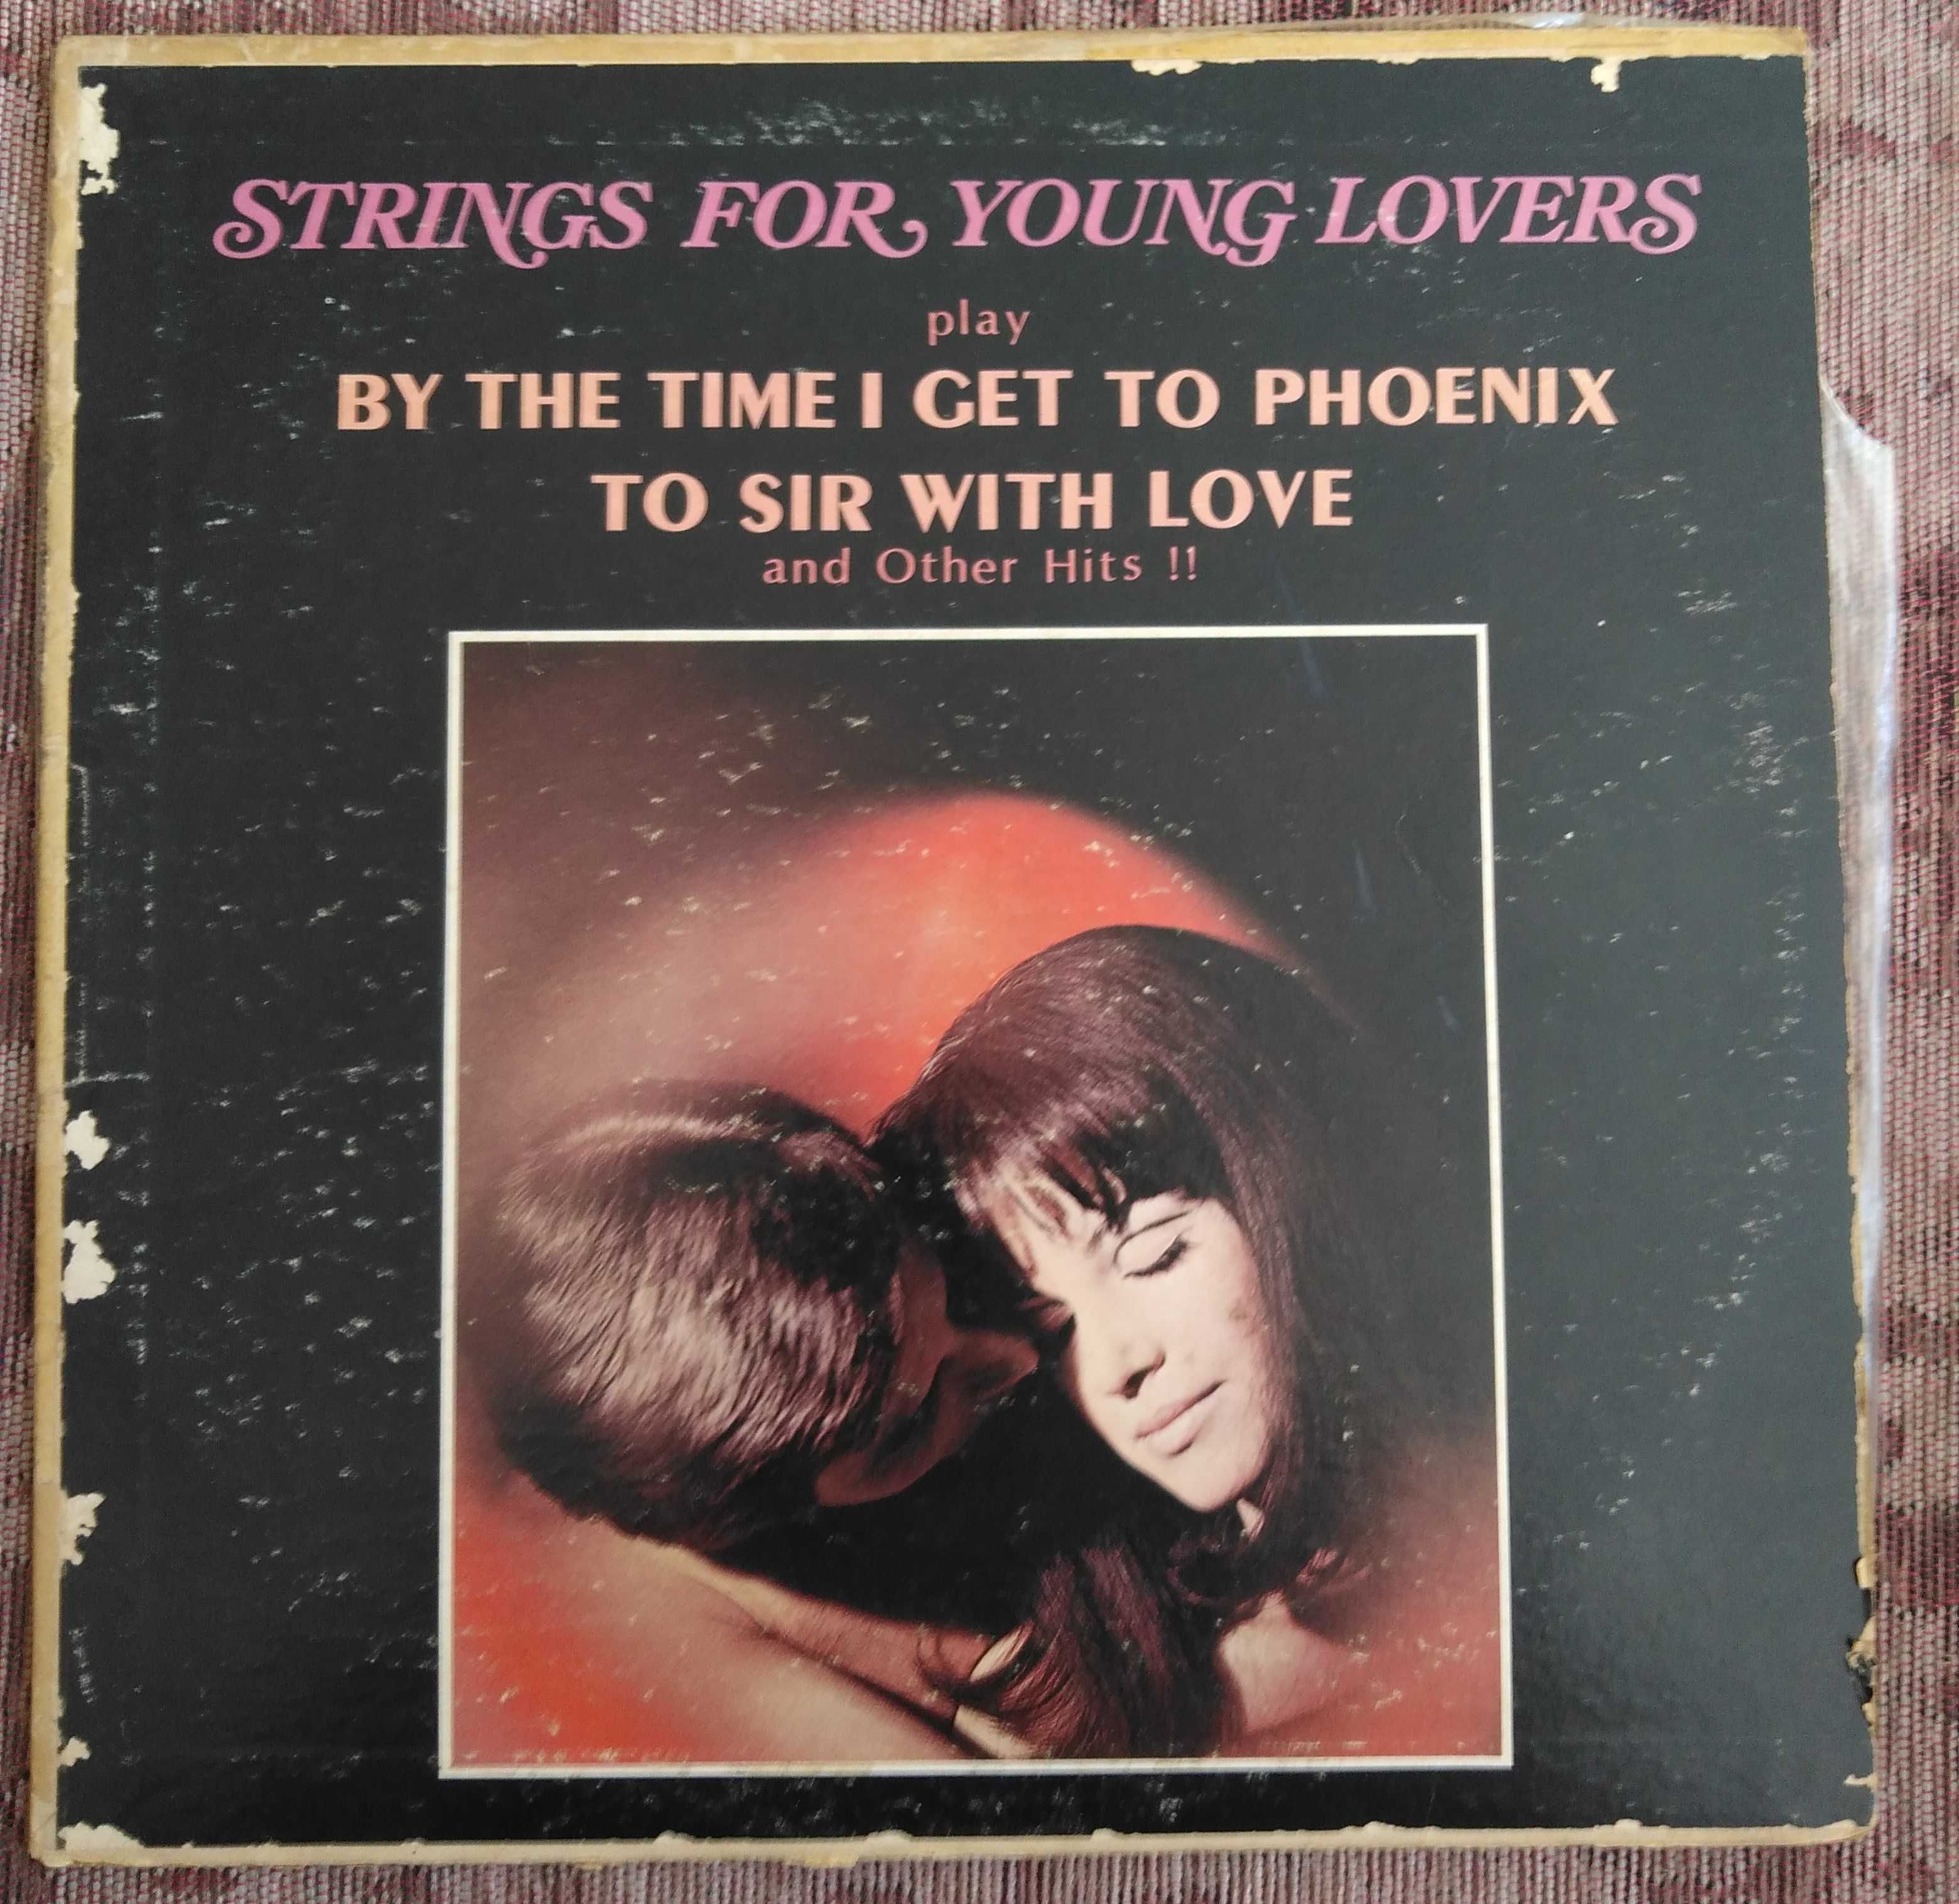 vinil: Paul Murad Orchestra “Strings for young lovers”